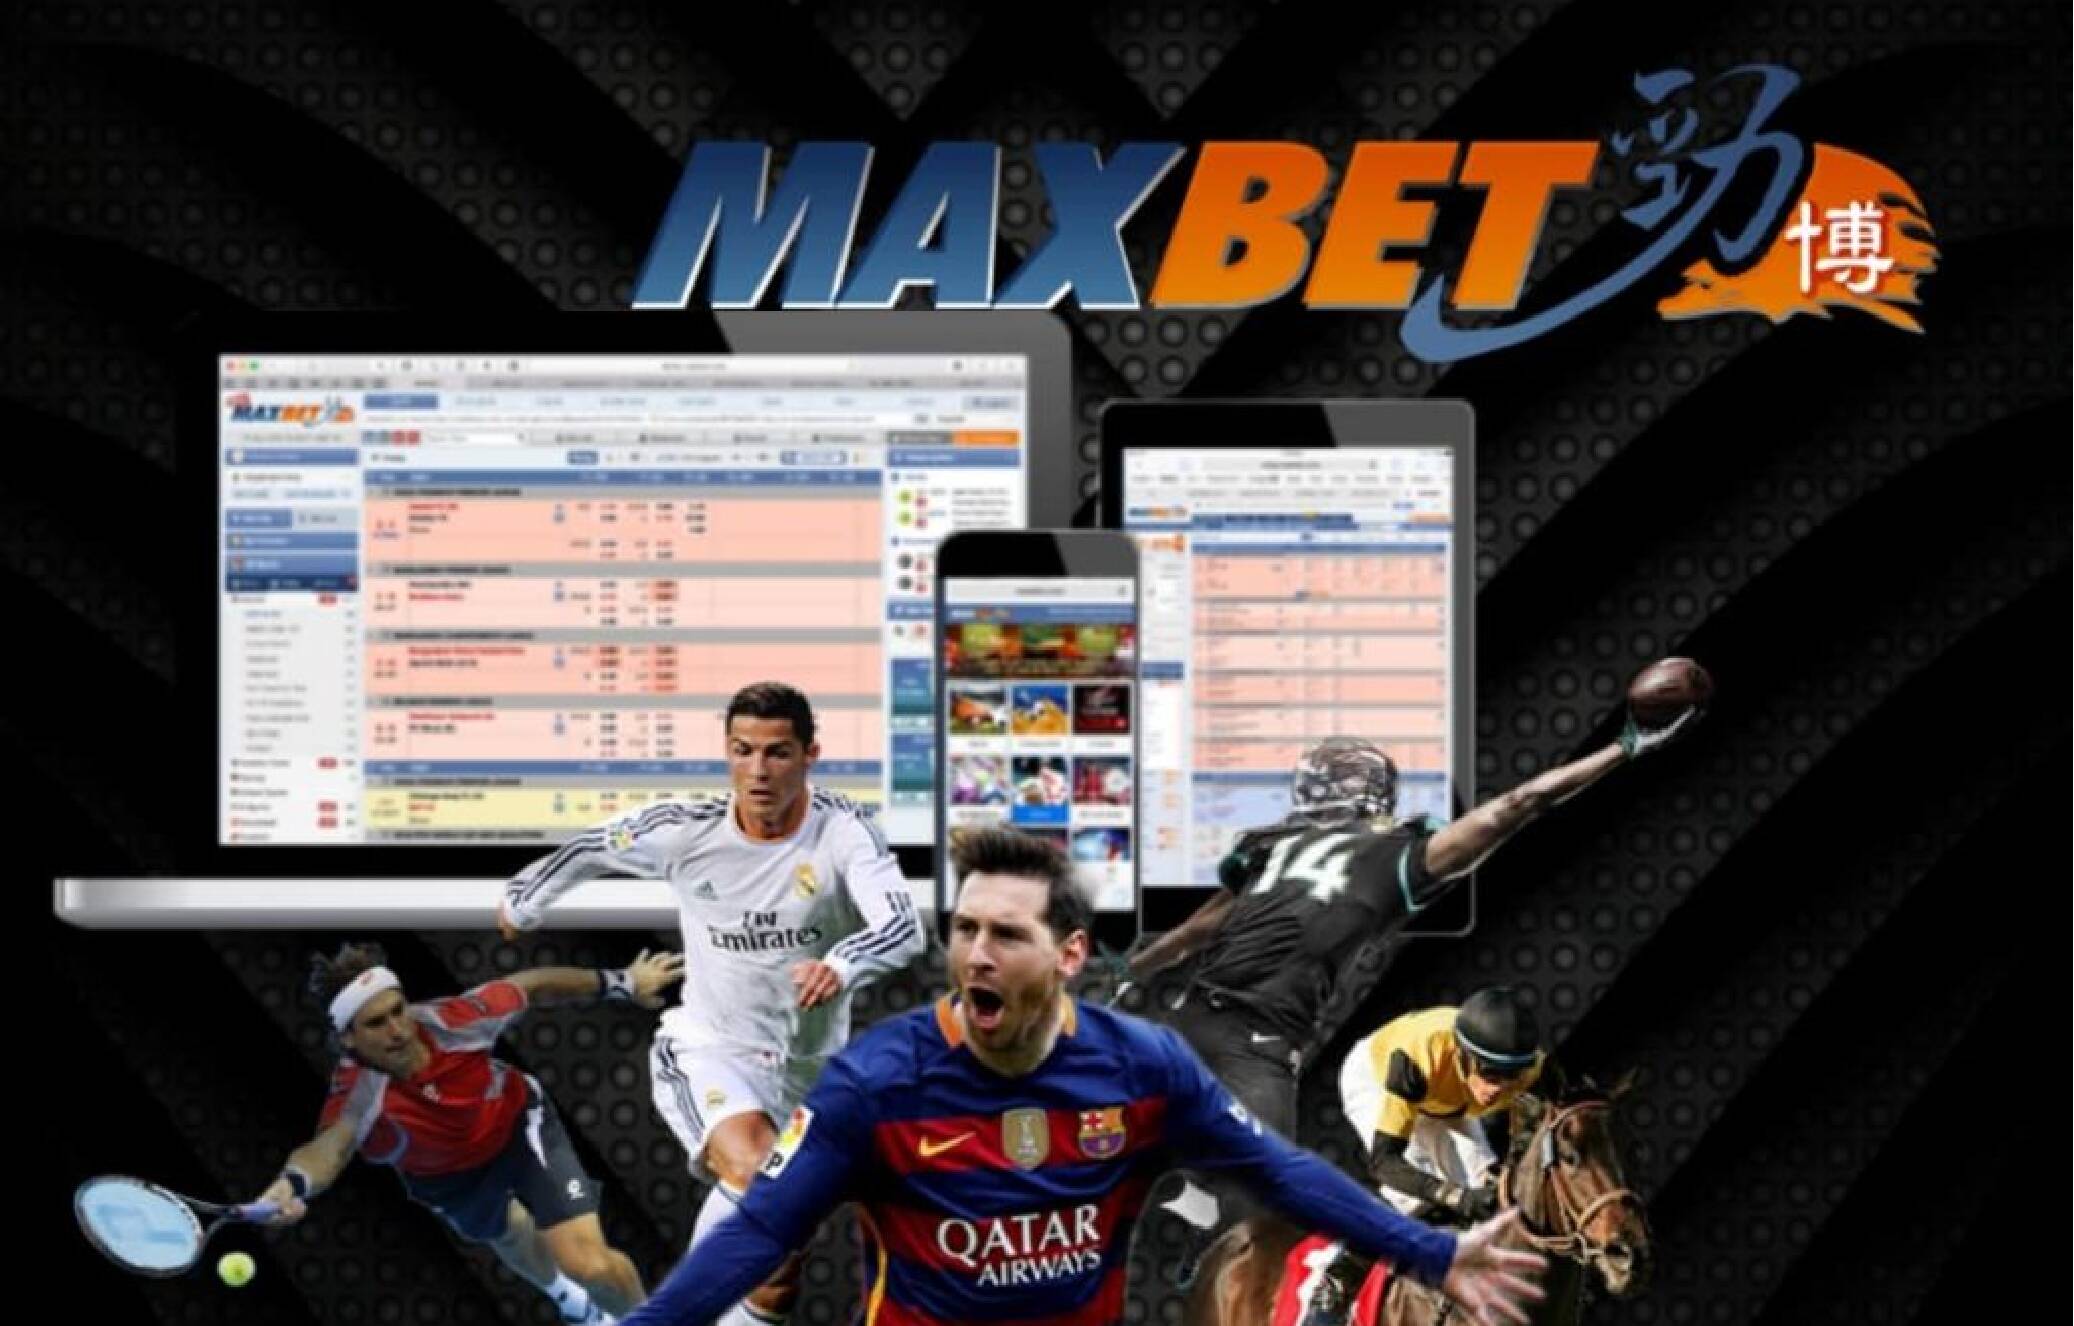 Tips for Maxbet